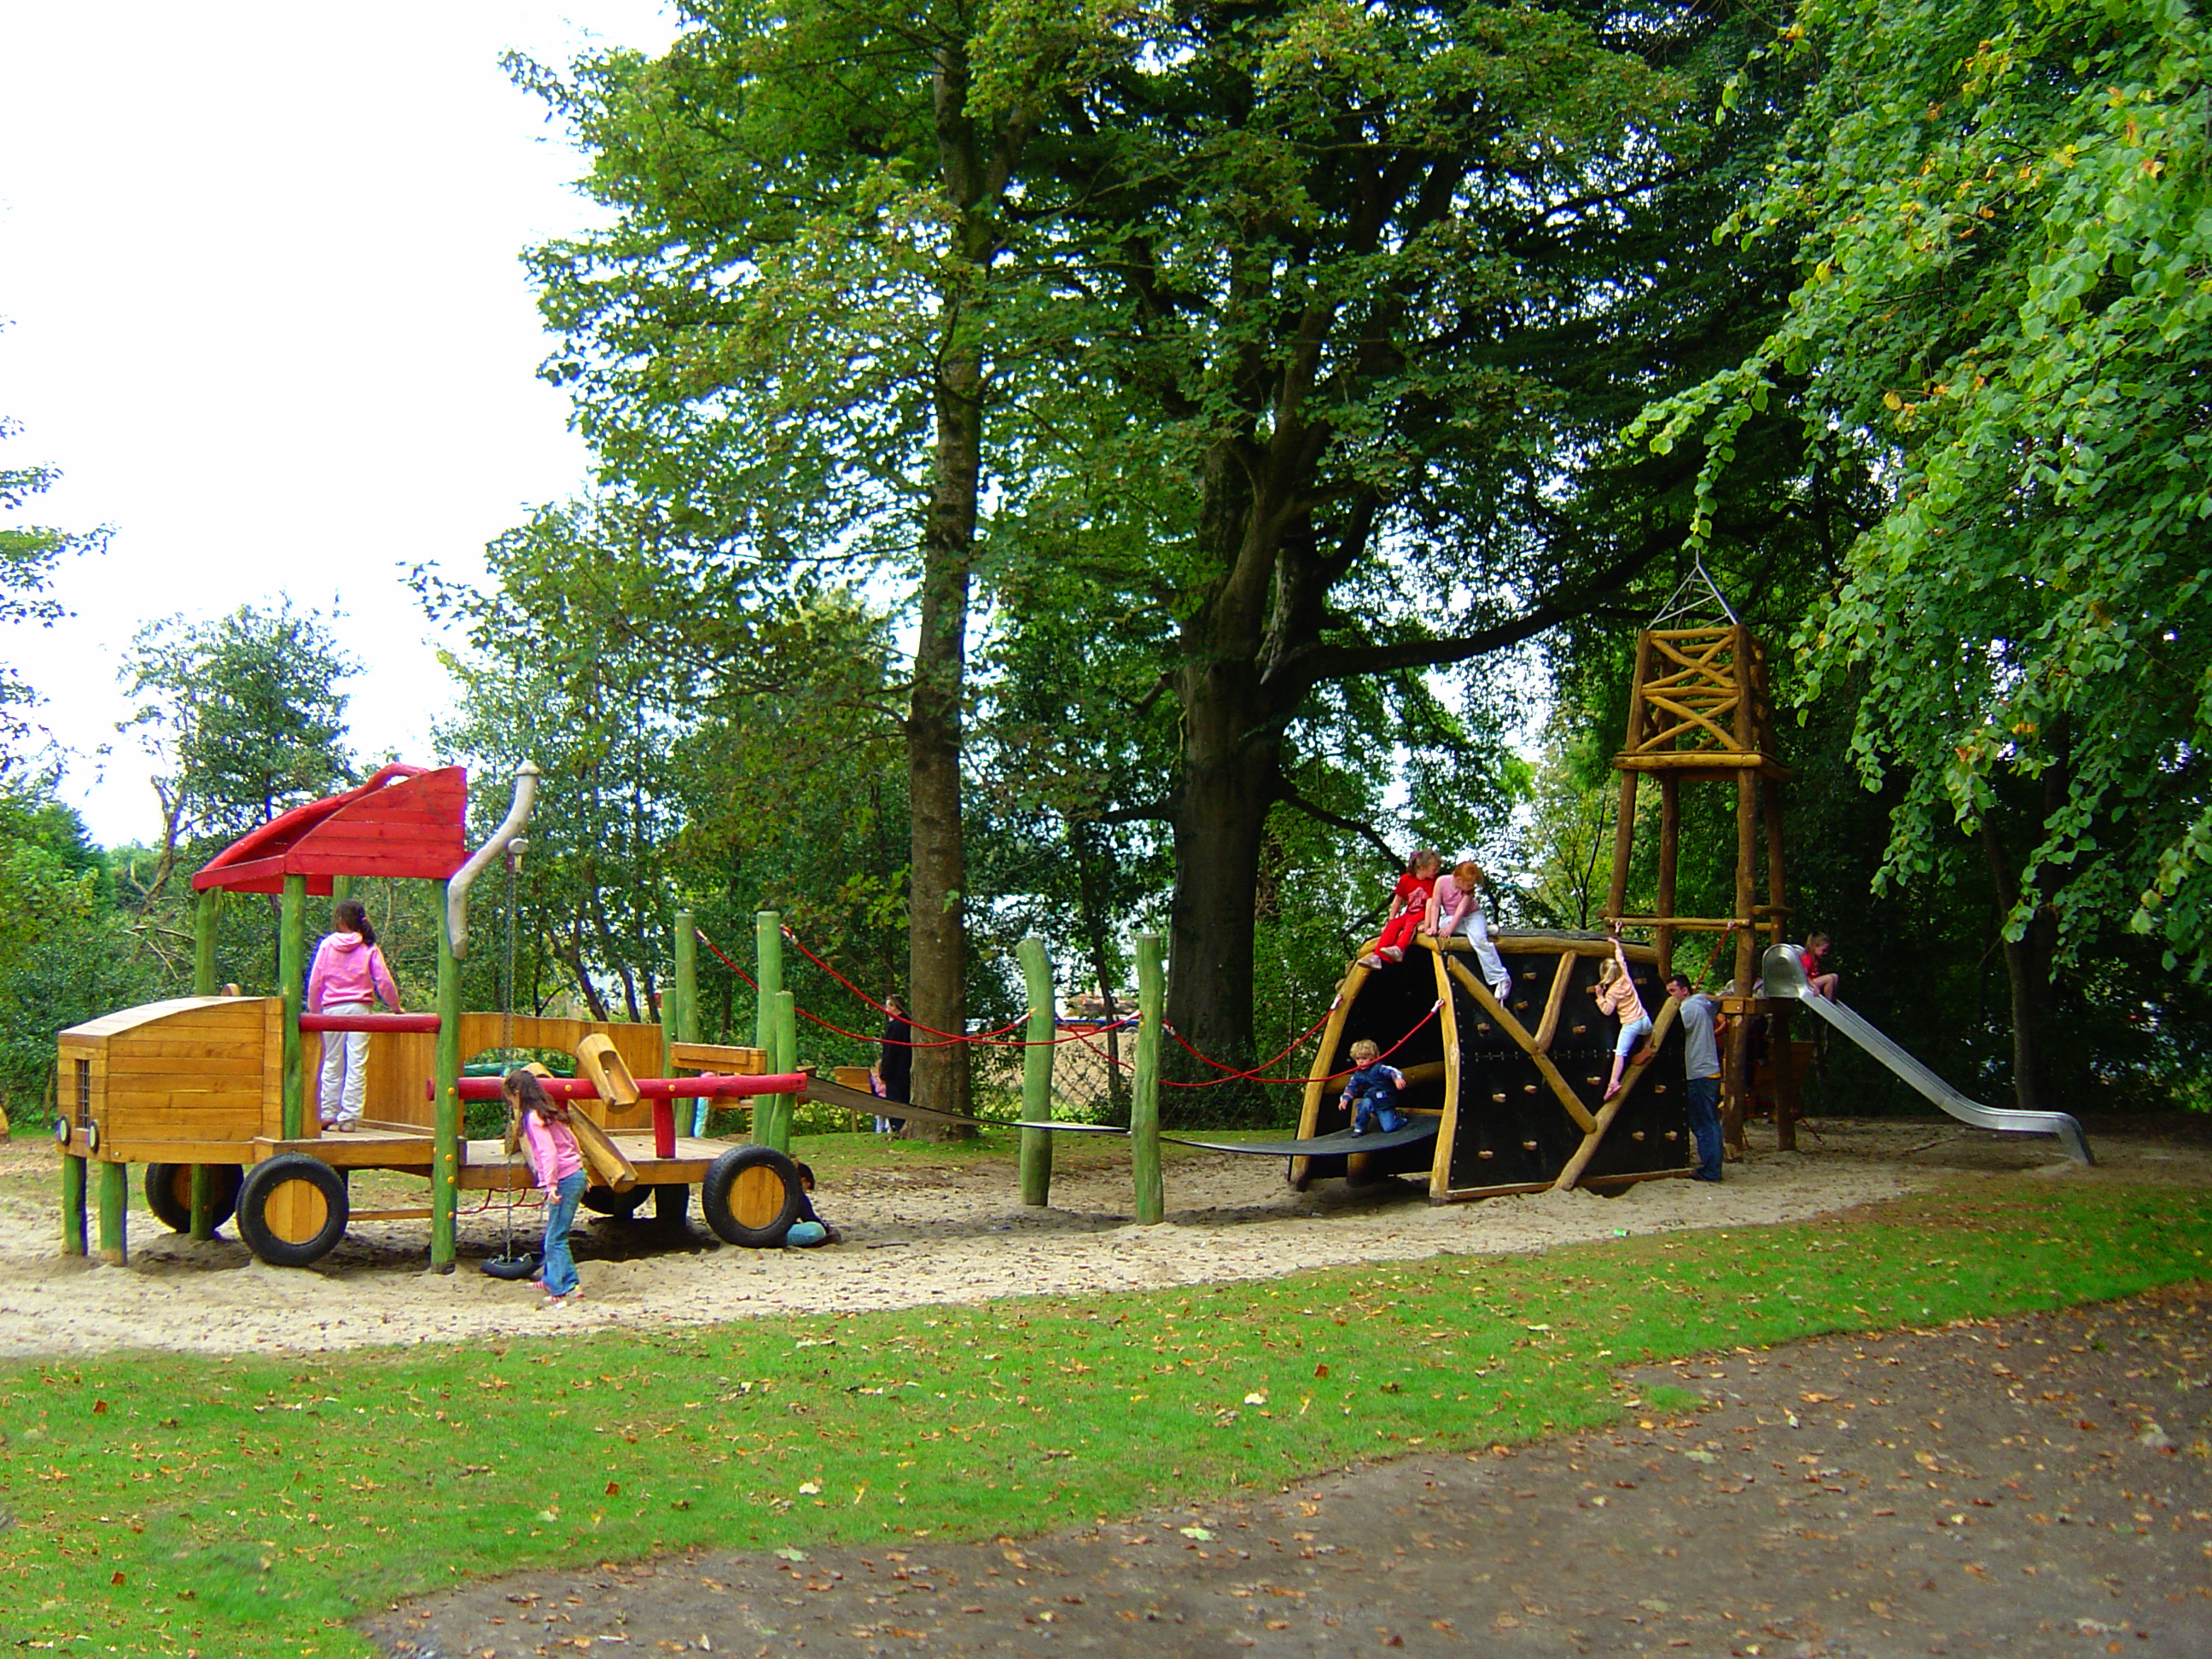 Playground for Castlecomer in Kilkenny